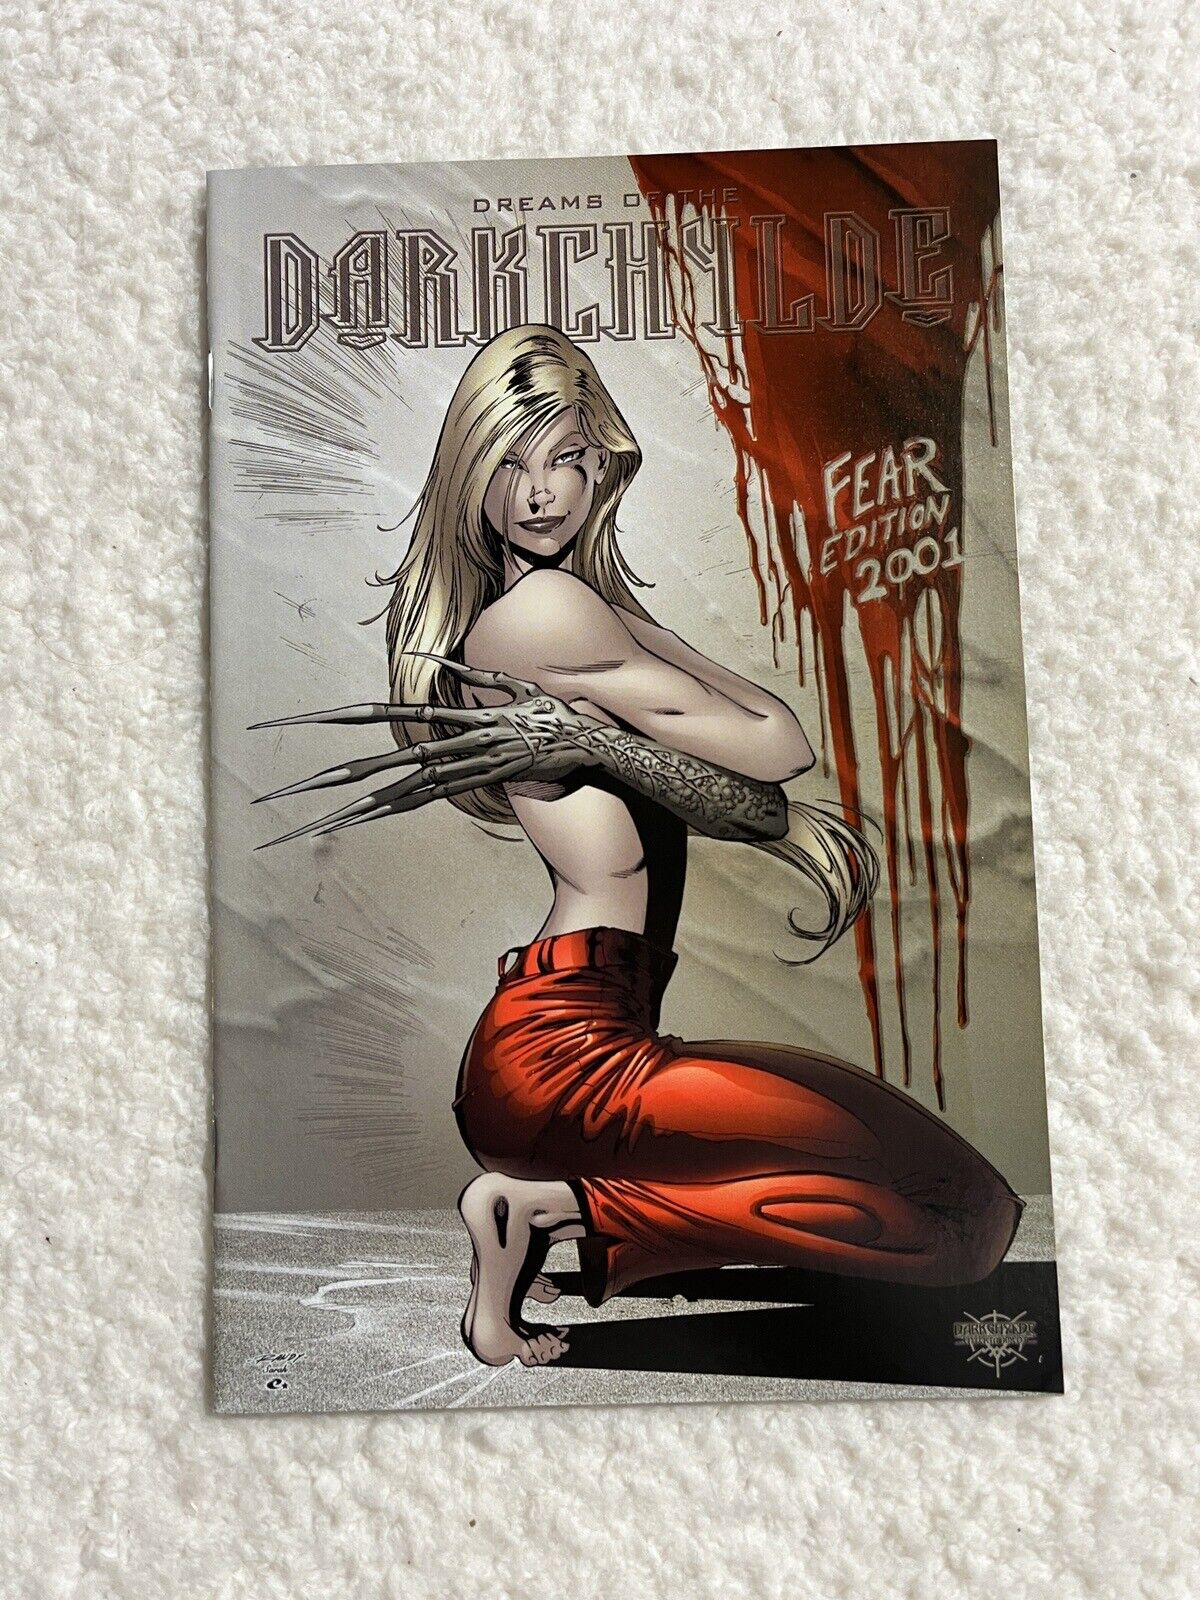 Dreams of the Darkchylde #4 Fear Edition 2001 Comic Limited To 3000